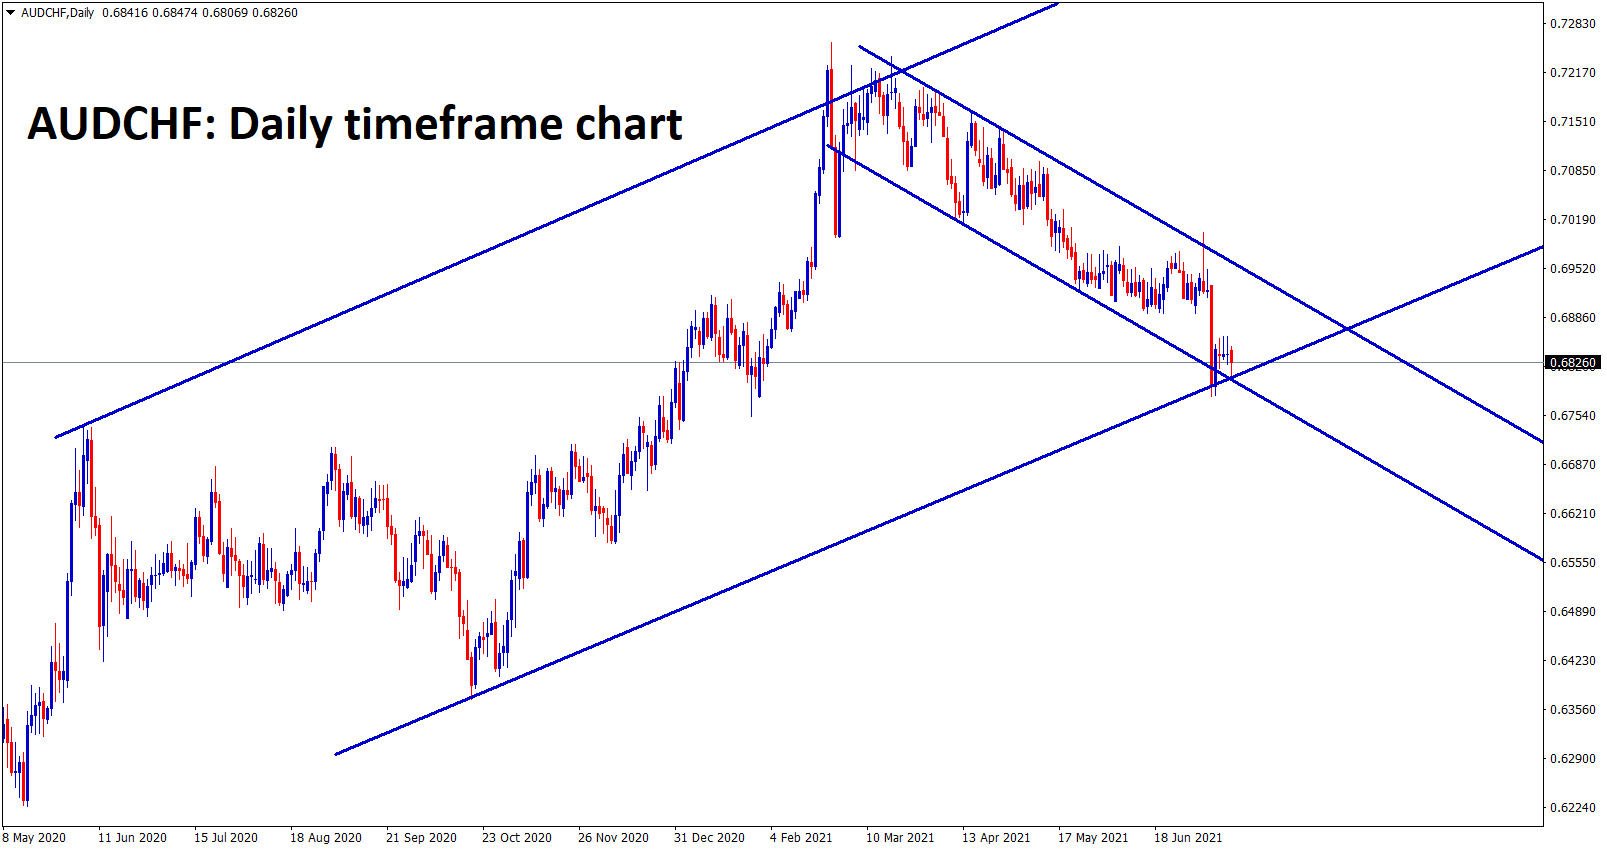 AUDCHF at the low level in both Ascending and Descending channels